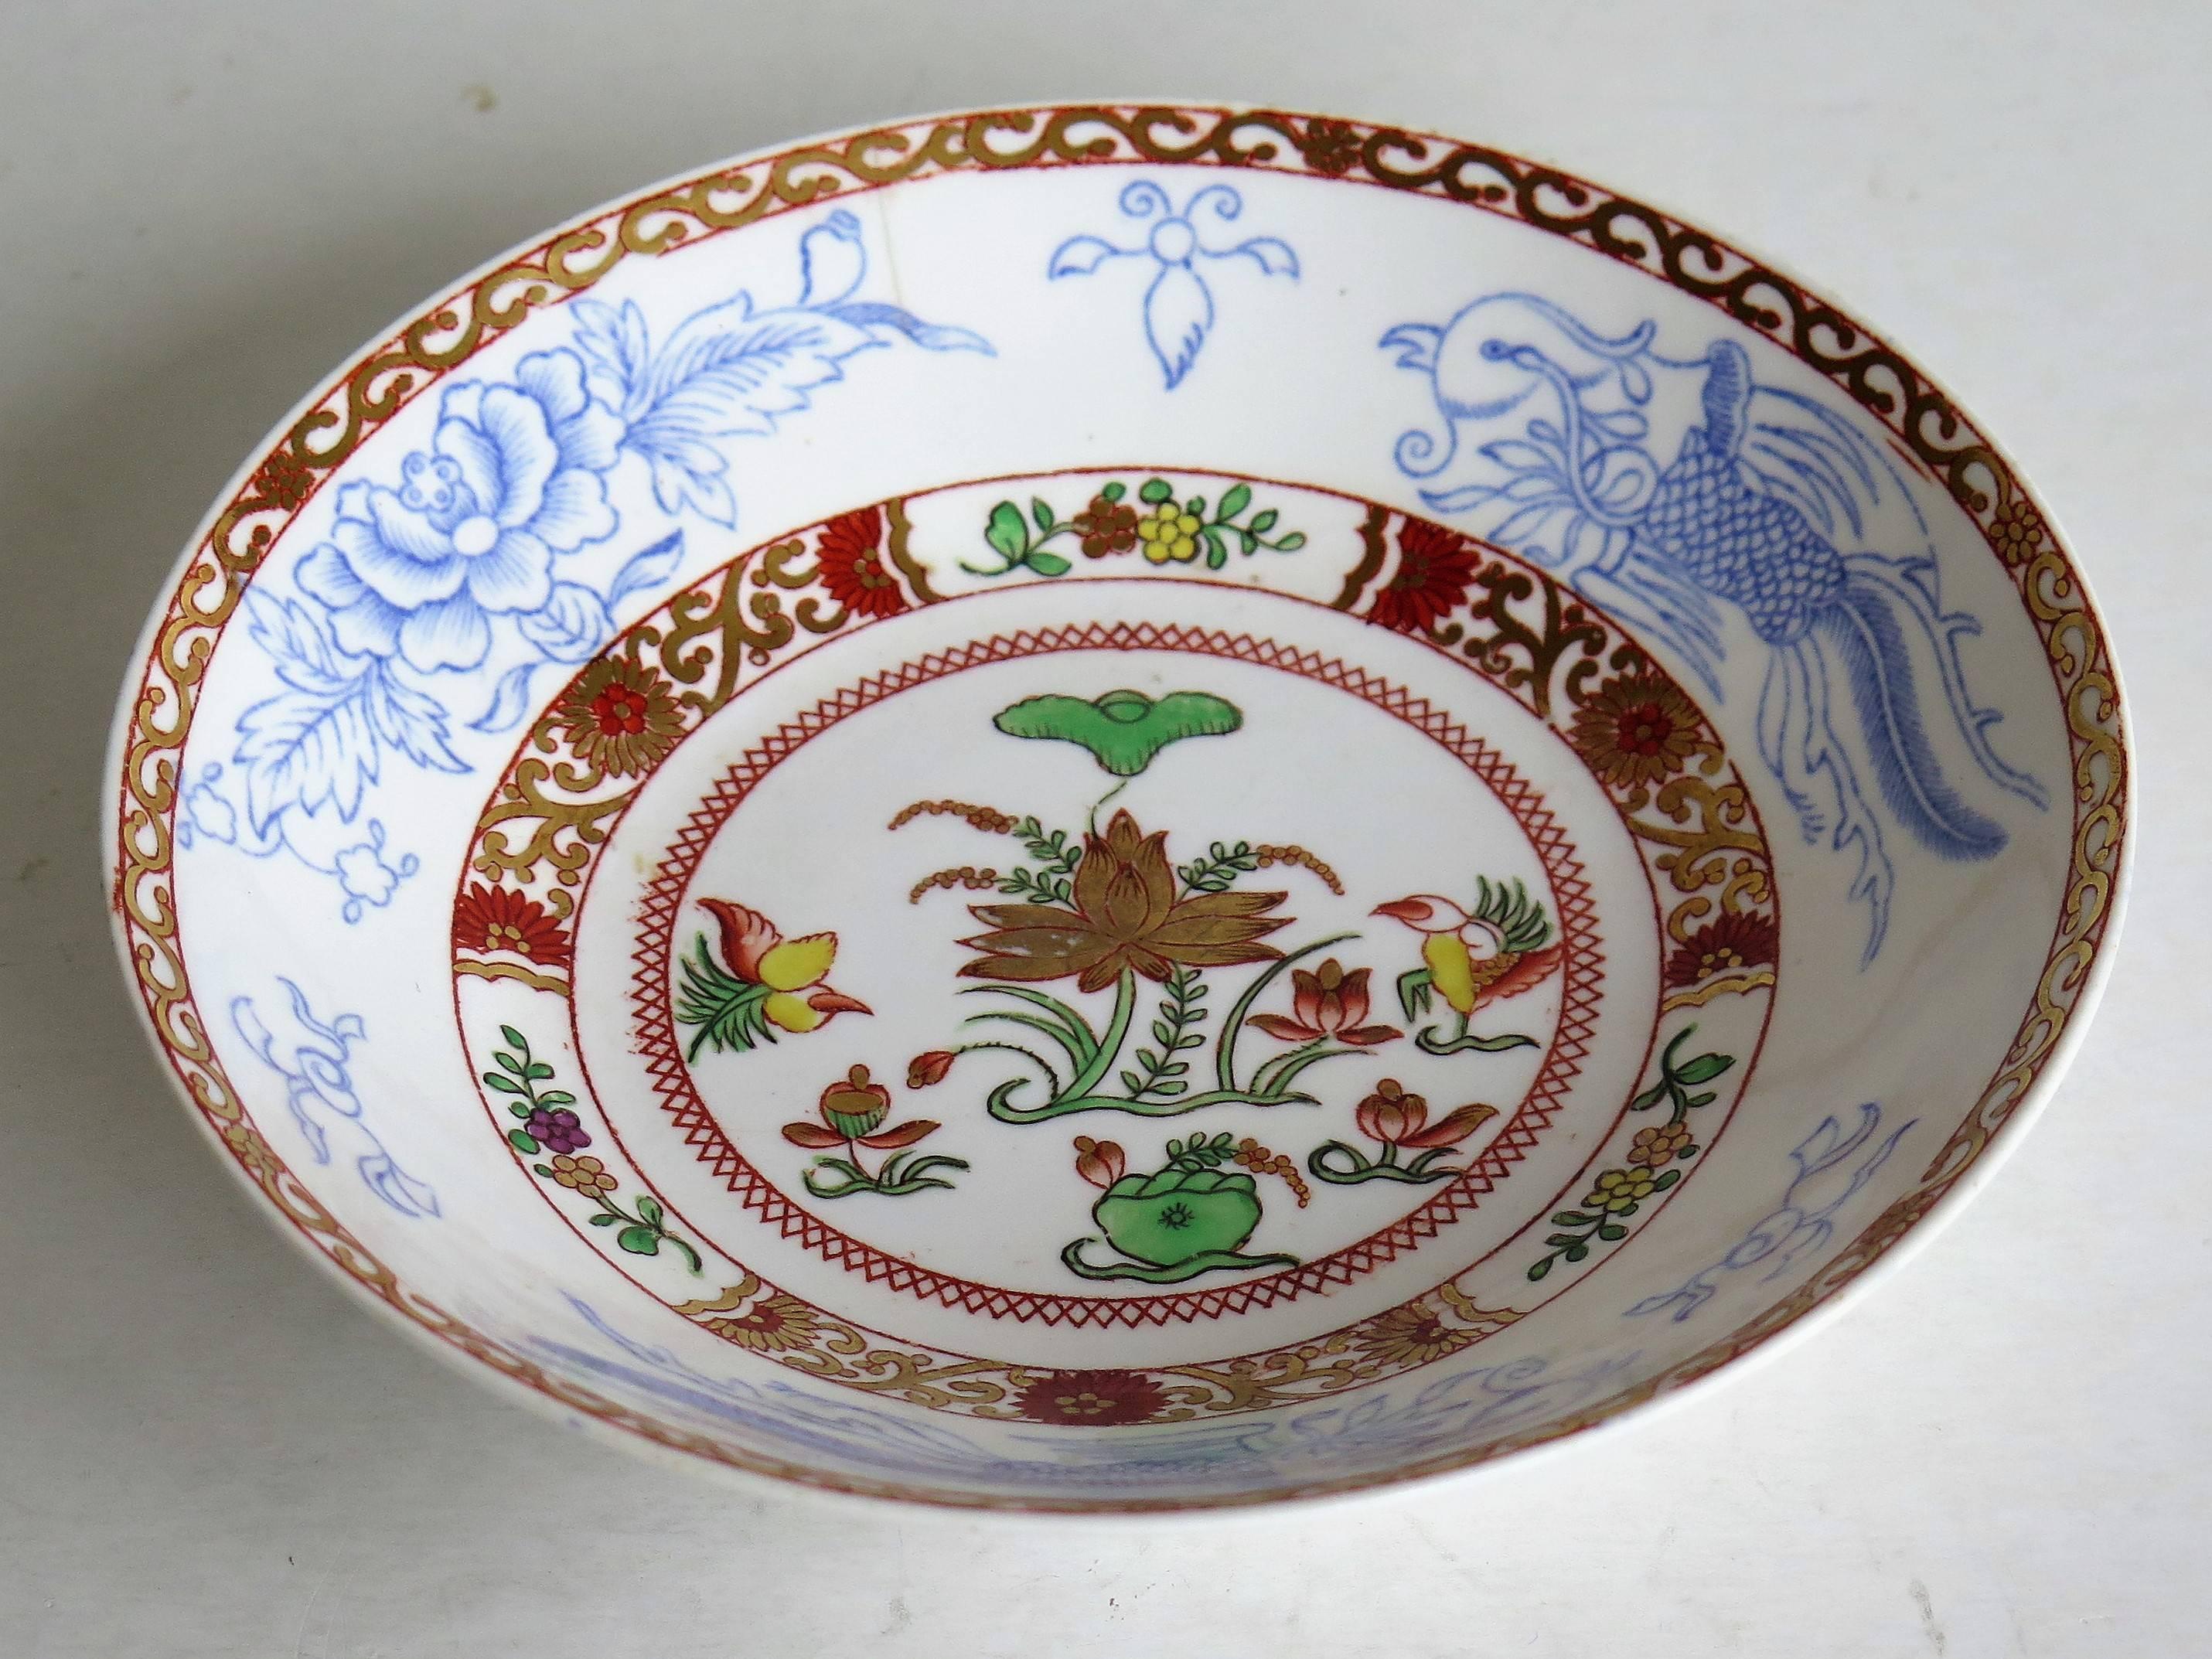 Early 19th C Spode Cup and Saucer Porcelain Chinoiserie Pattern 2638, Circa 1815 9